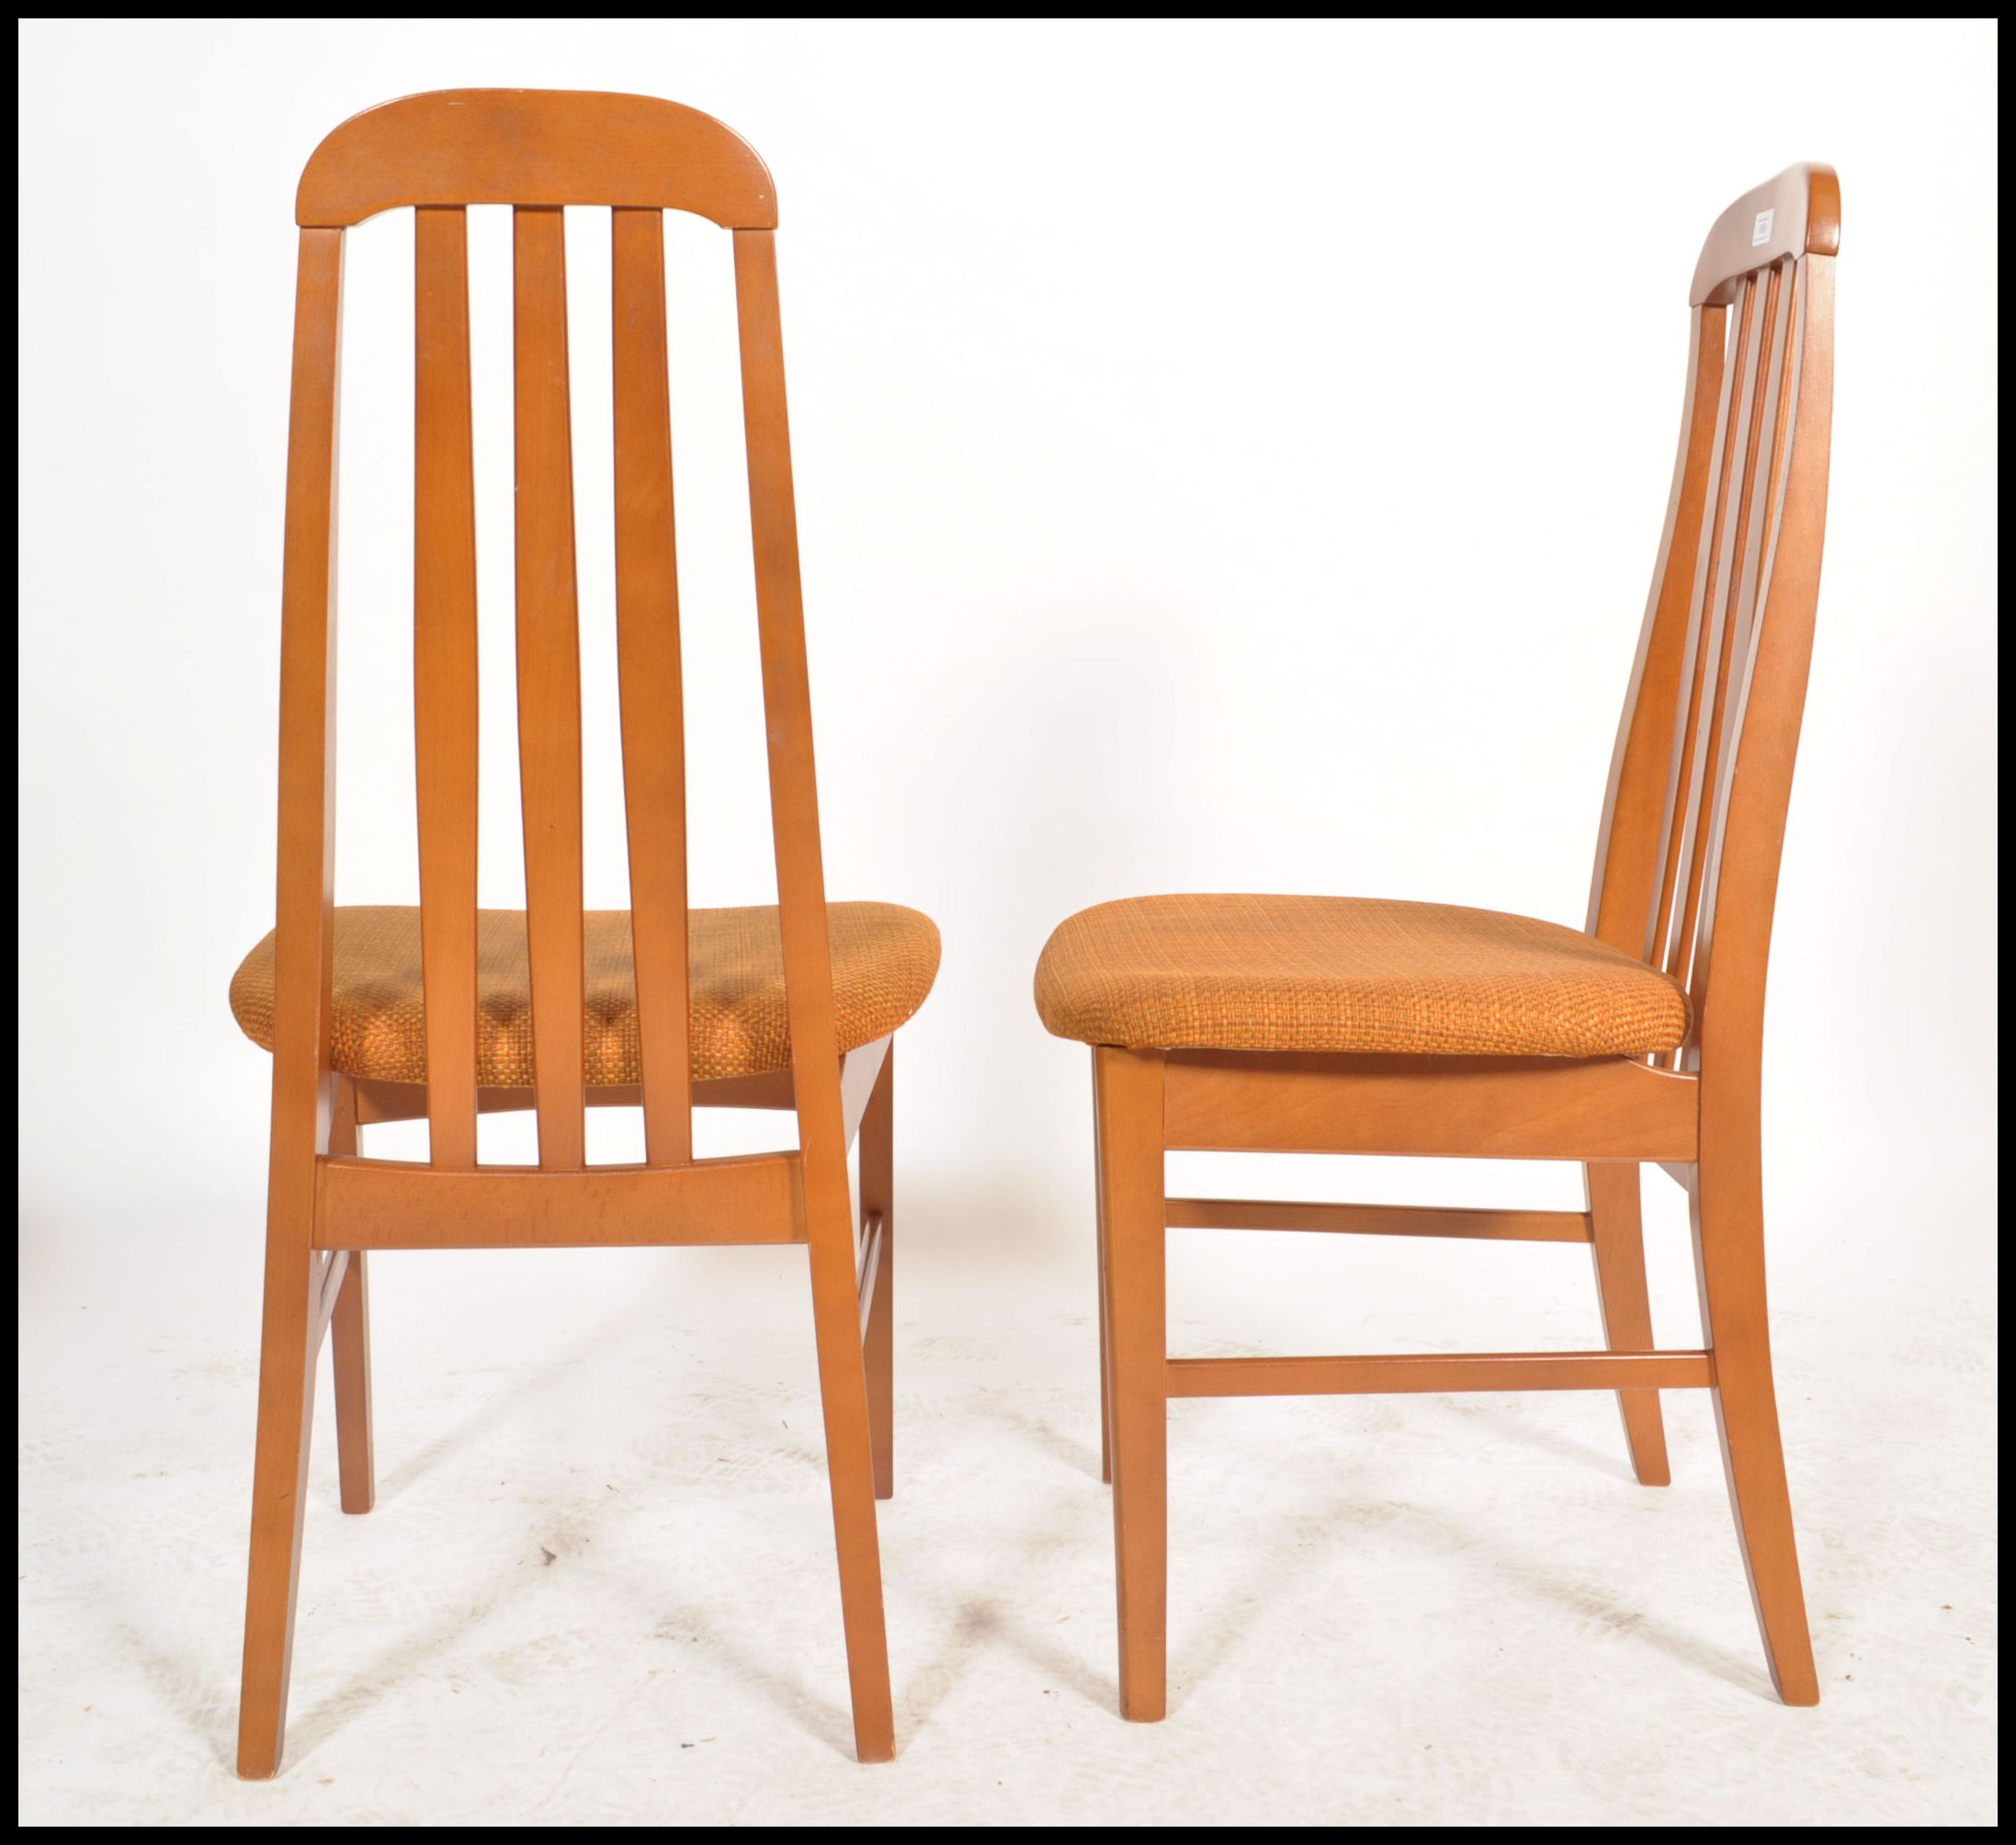 A set of 4 20th century Nathan furniture dining chairs in teak being raised on tapering legs with - Image 4 of 4